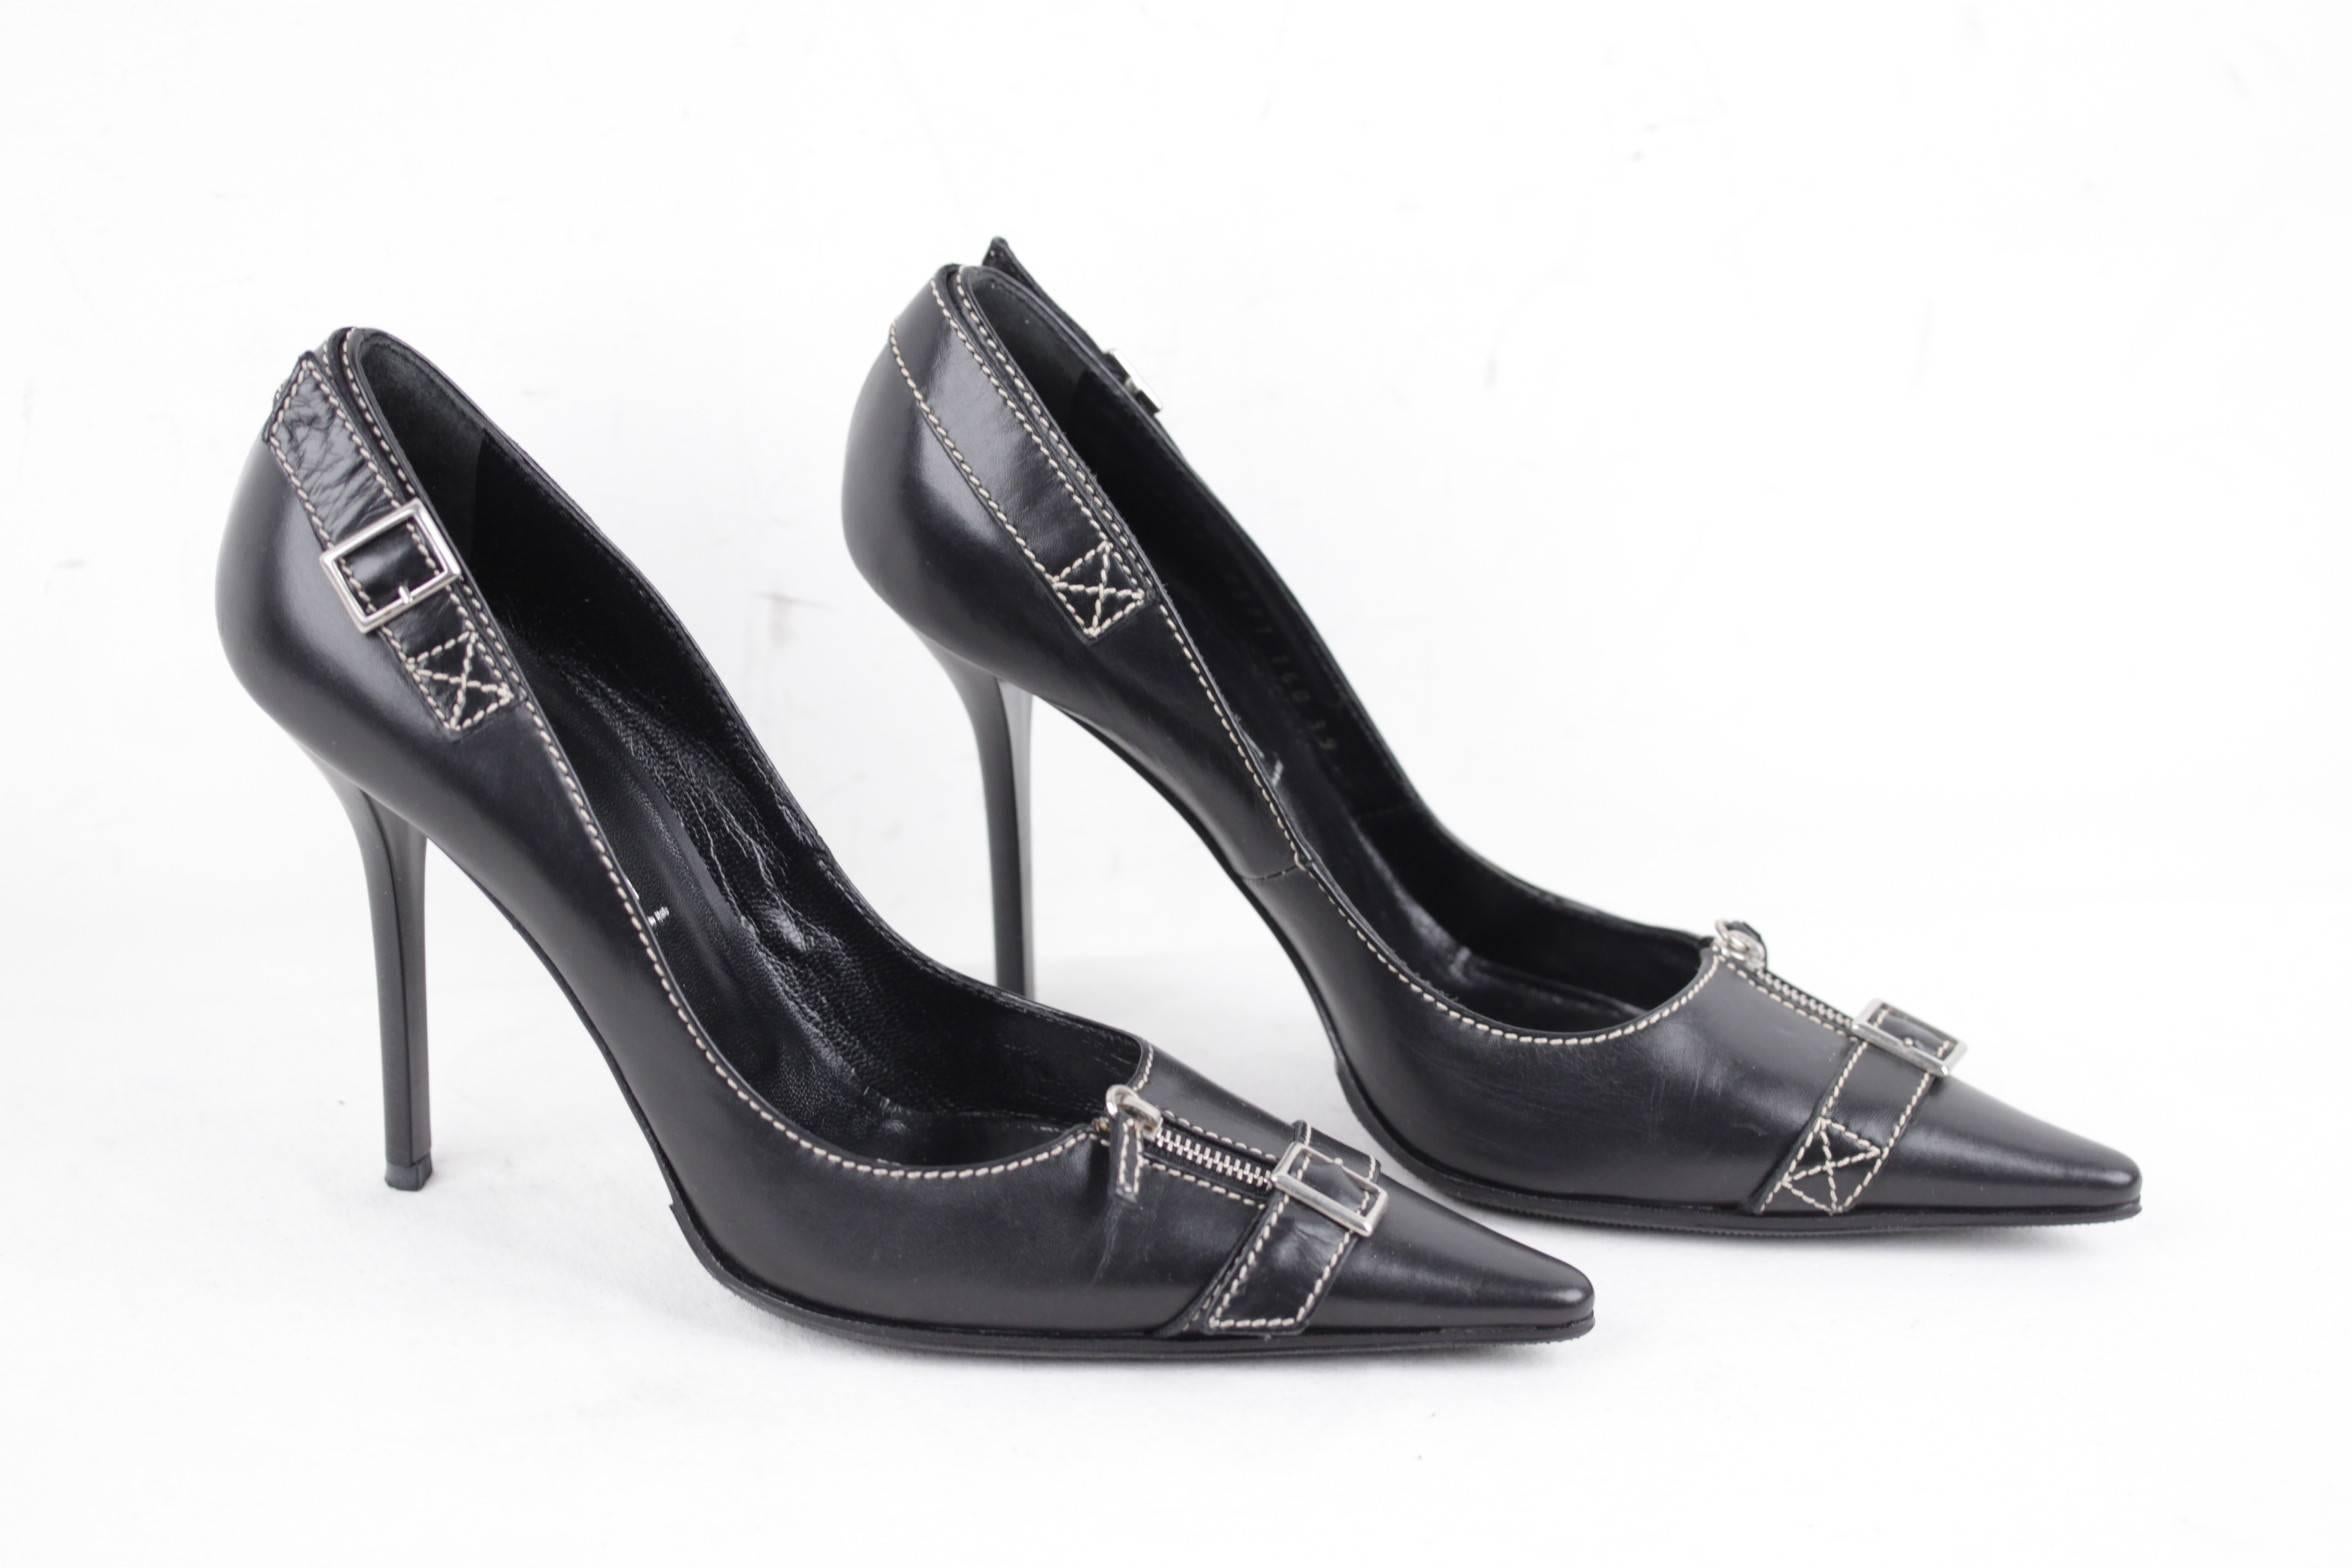 
- Size:39
- Color Black
- Leather upper with contrast stitchings
- Stiletto heels
- Pointed toes
- Zip and buckle detailing
- 4 1/4 inches - 10,7 cm heels

Condition rate & details (please read our condition chart below): EXCELLENT